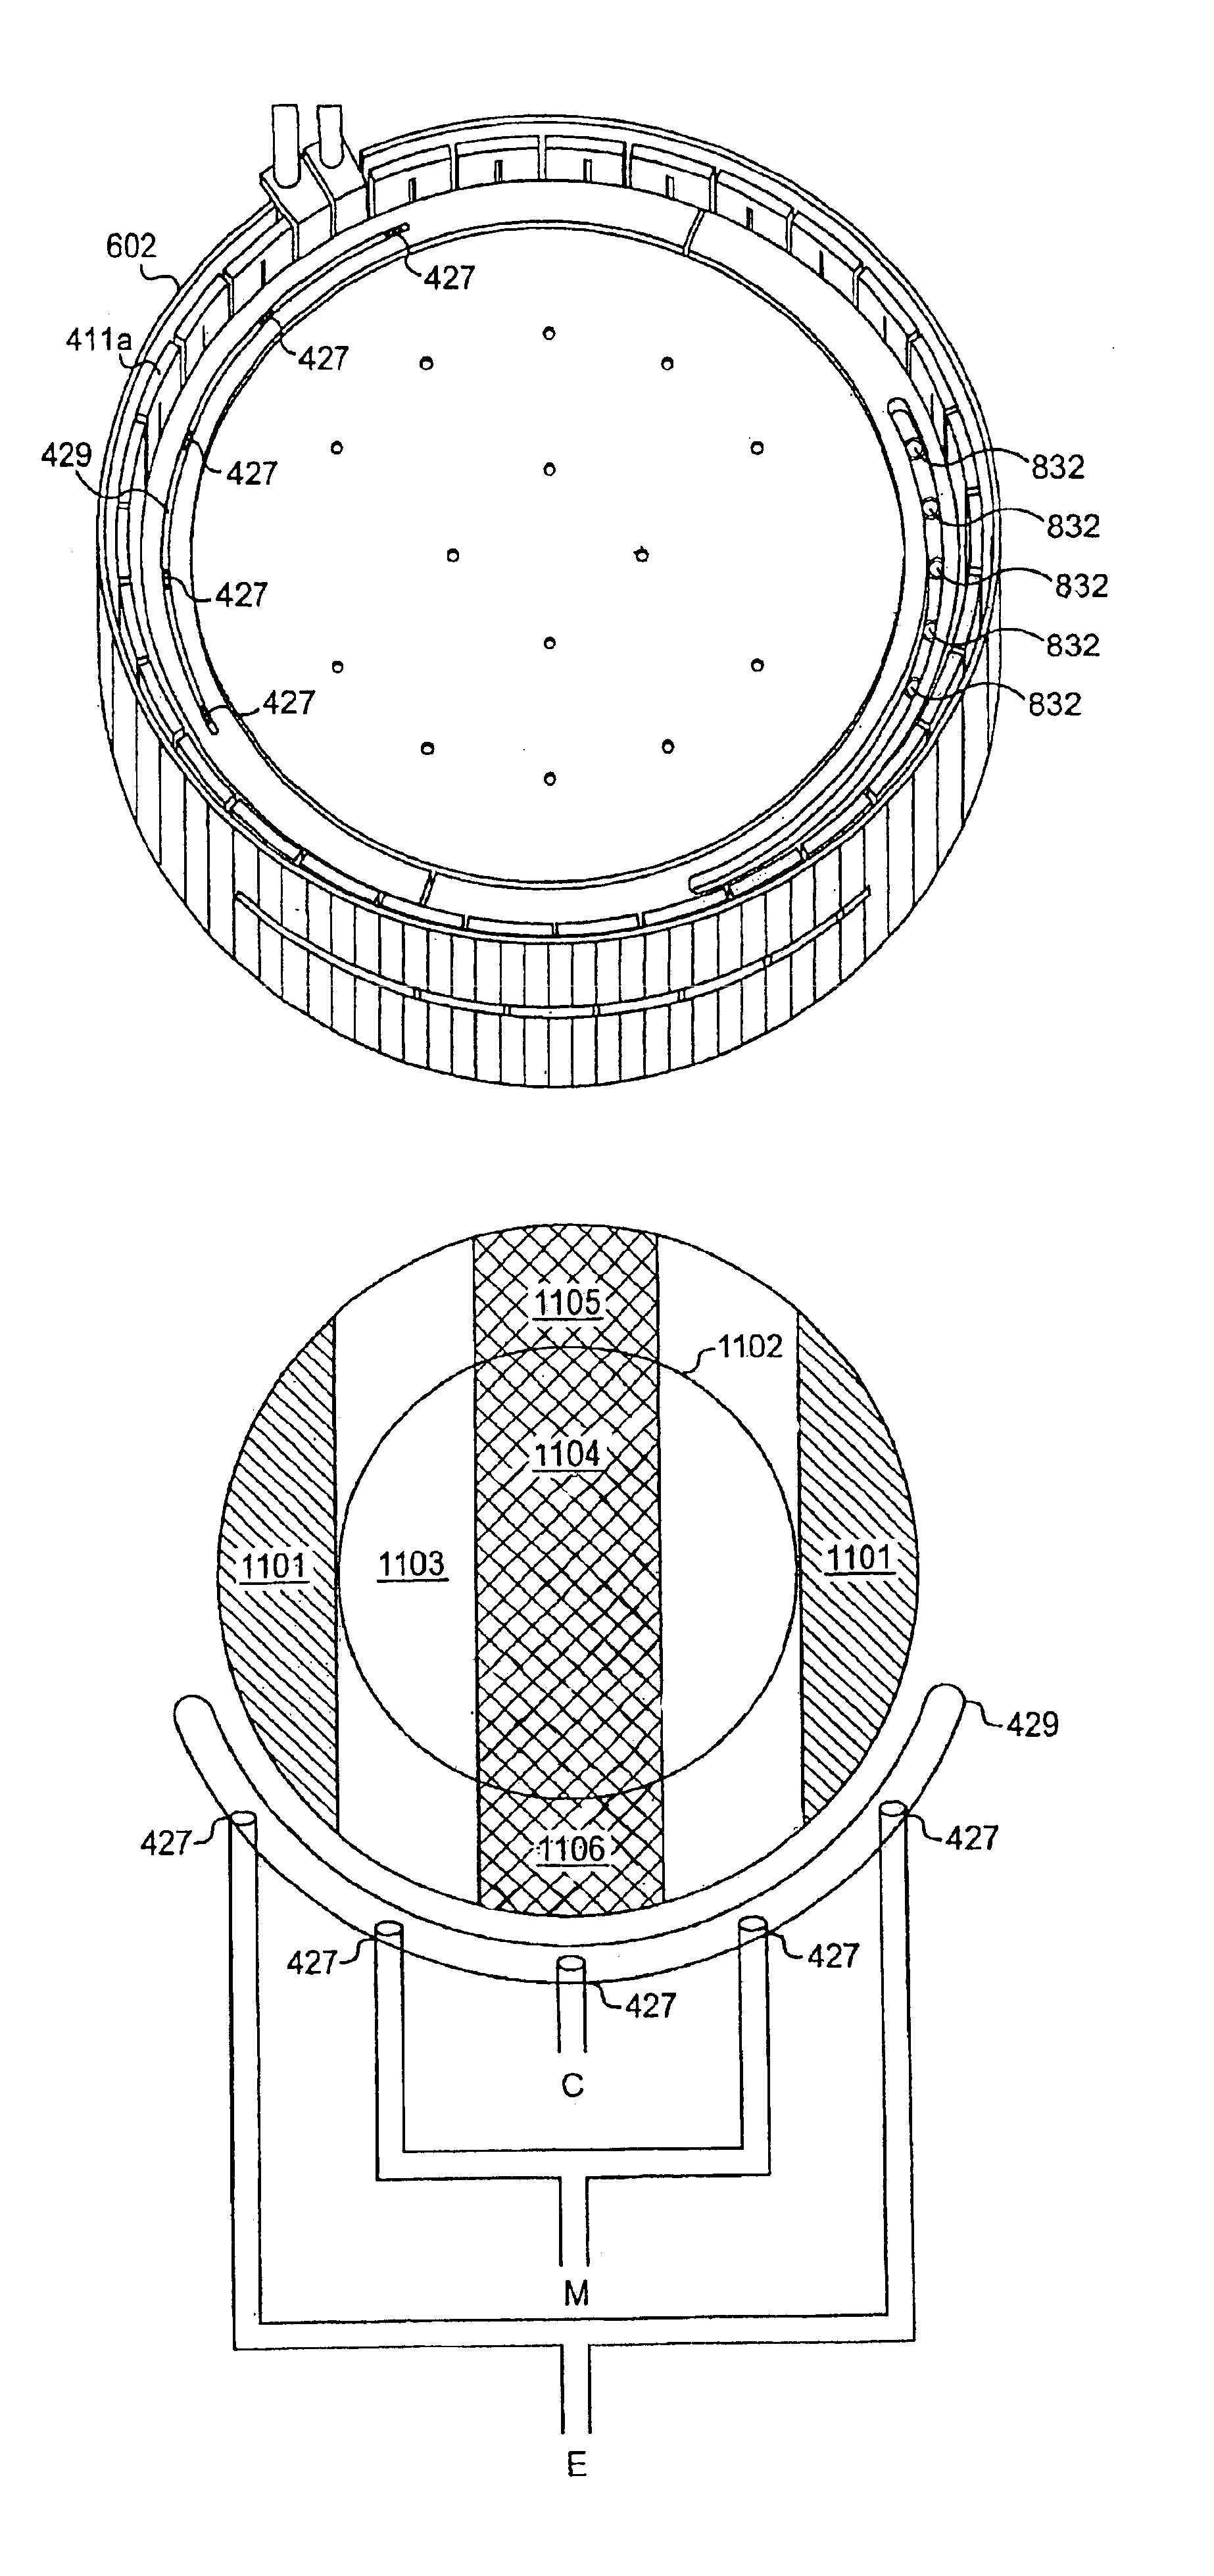 Systems and methods for epitaxially depositing films on a semiconductor substrate